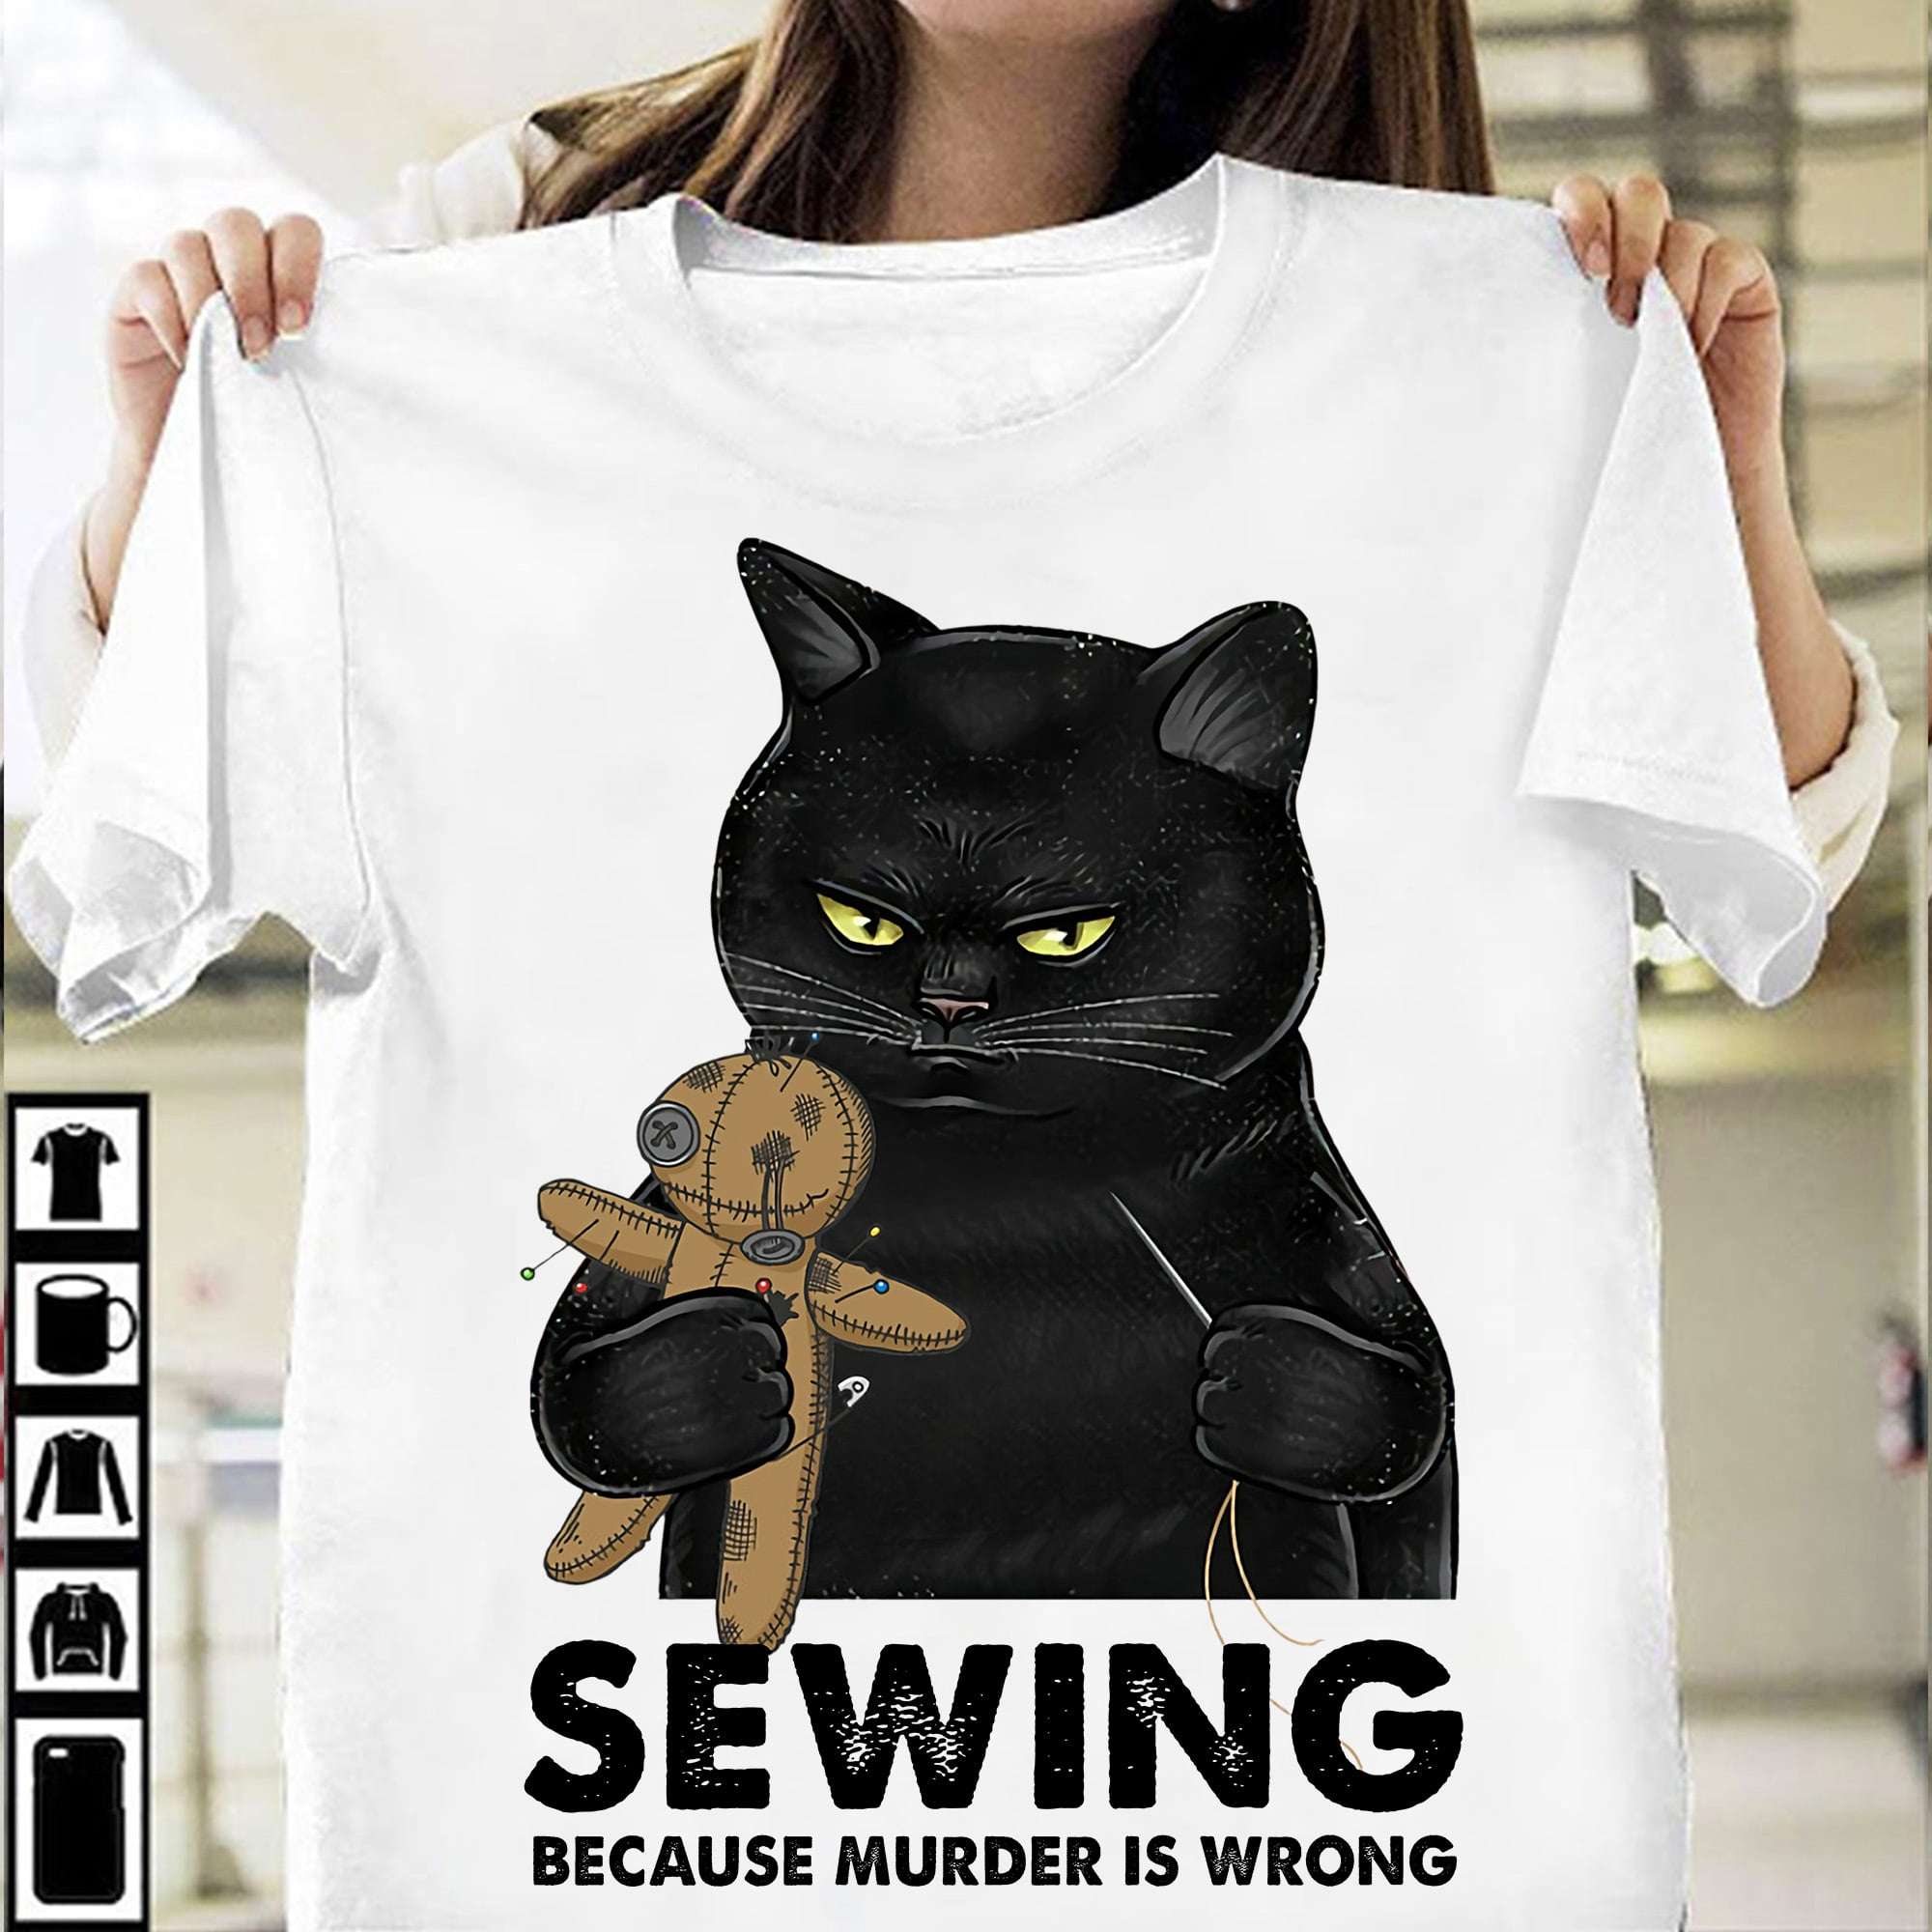 Black Cat With Voodoo Doll, Cats Sewing - Sewing because murder is wrong